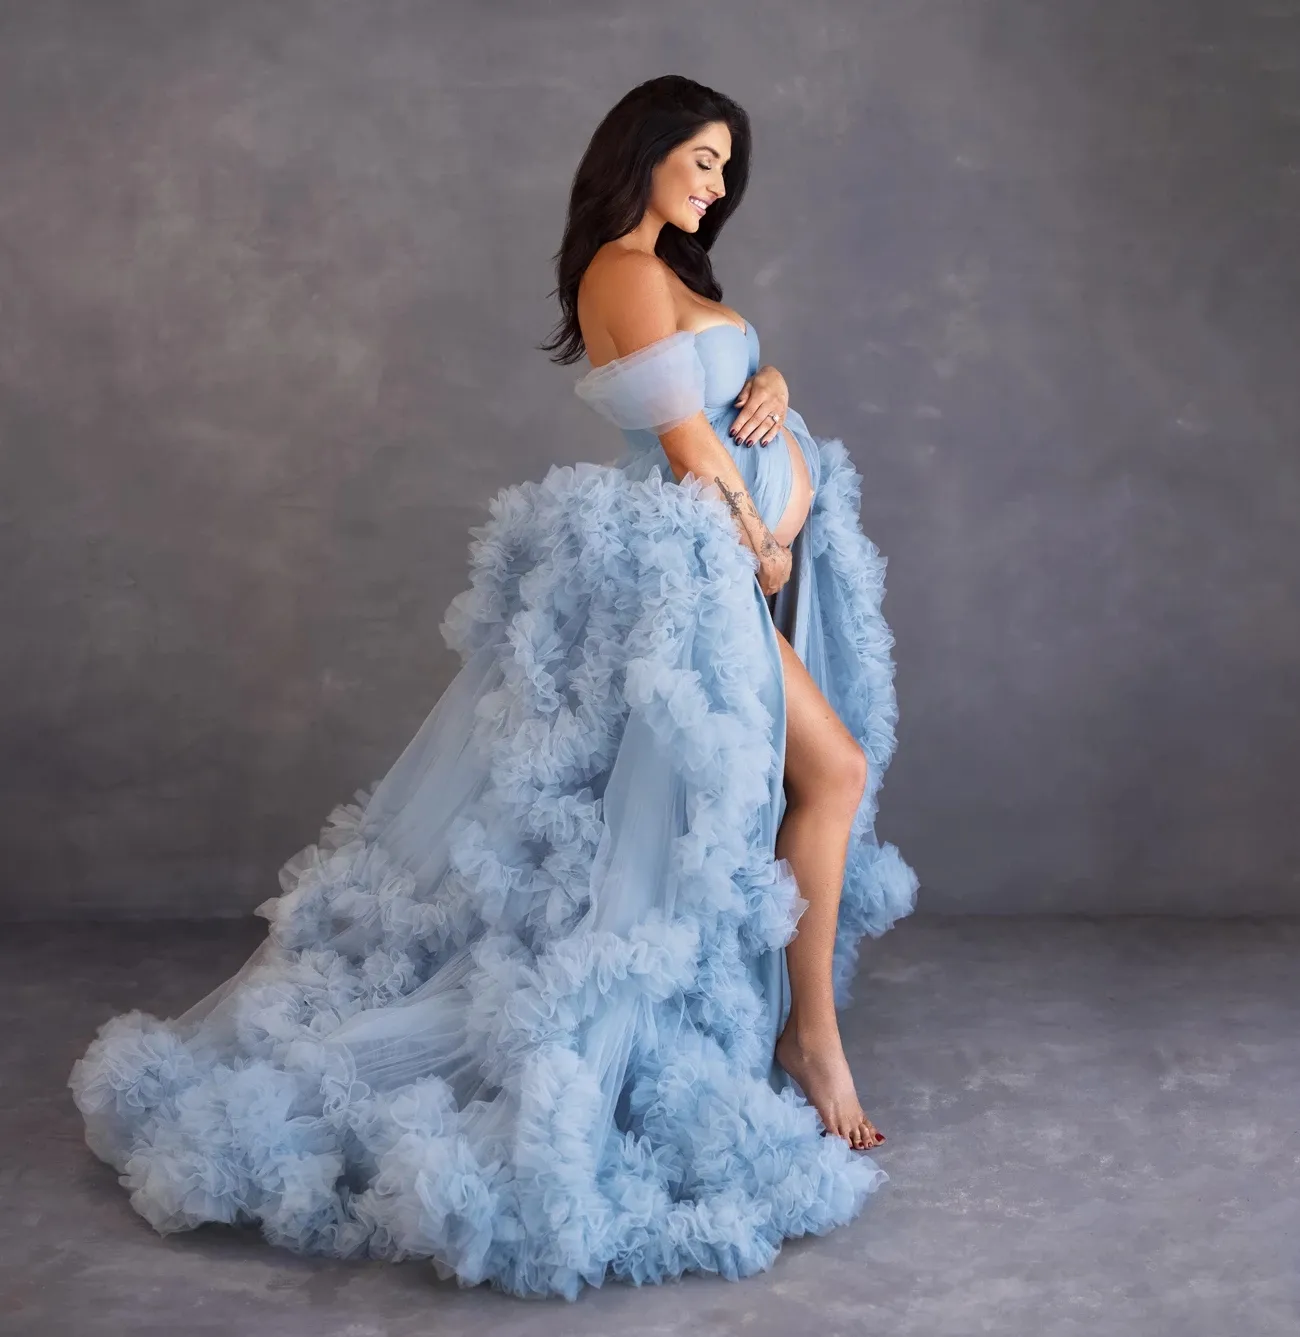 Luxury Blue Maternity Pre Wedding Photoshoot Dress With Ruffles For 2023  Photoshoots, Pregnancy, Baby Shower, And Beach Bridal Gown Country Boho  Style For Women Plus Size Available From Bridalstore, $106.32